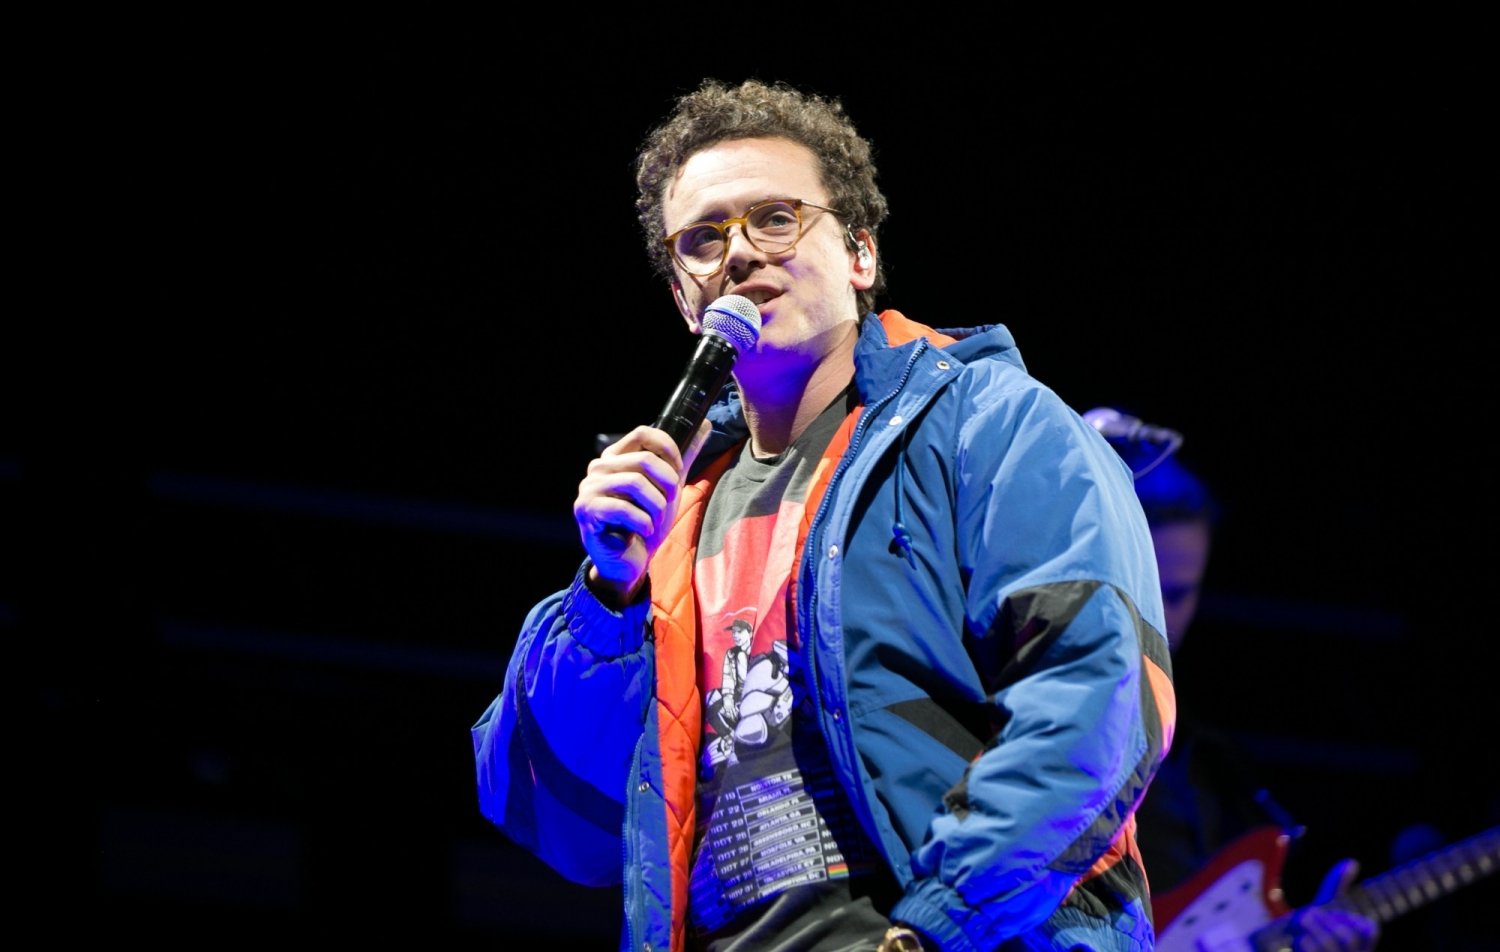 Logic explains why he loves watching Twitch chess streamer